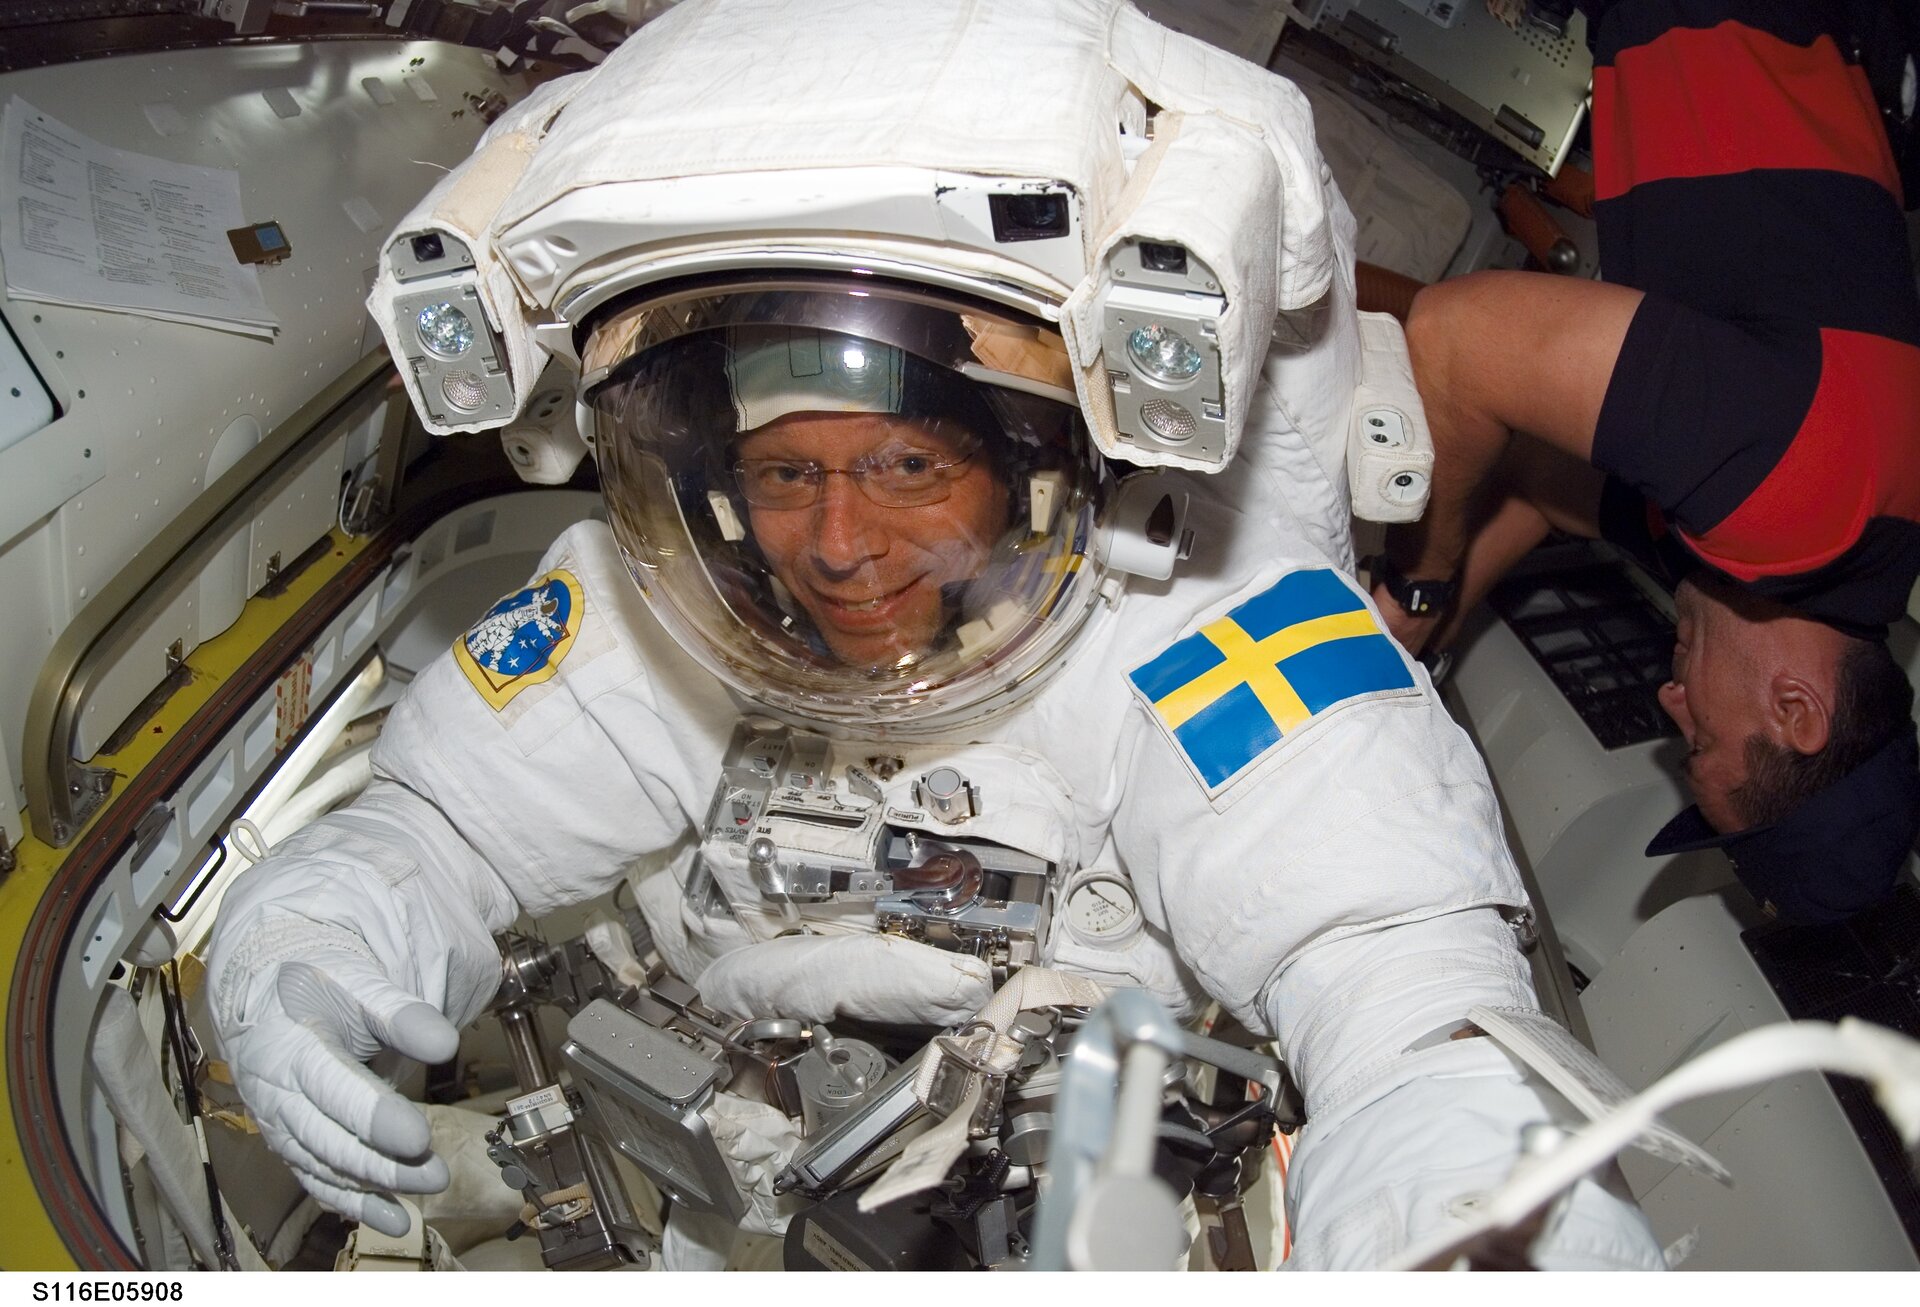 Christer Fuglesang prepares for his first spacewalk and feels confident – thanks to extensive training